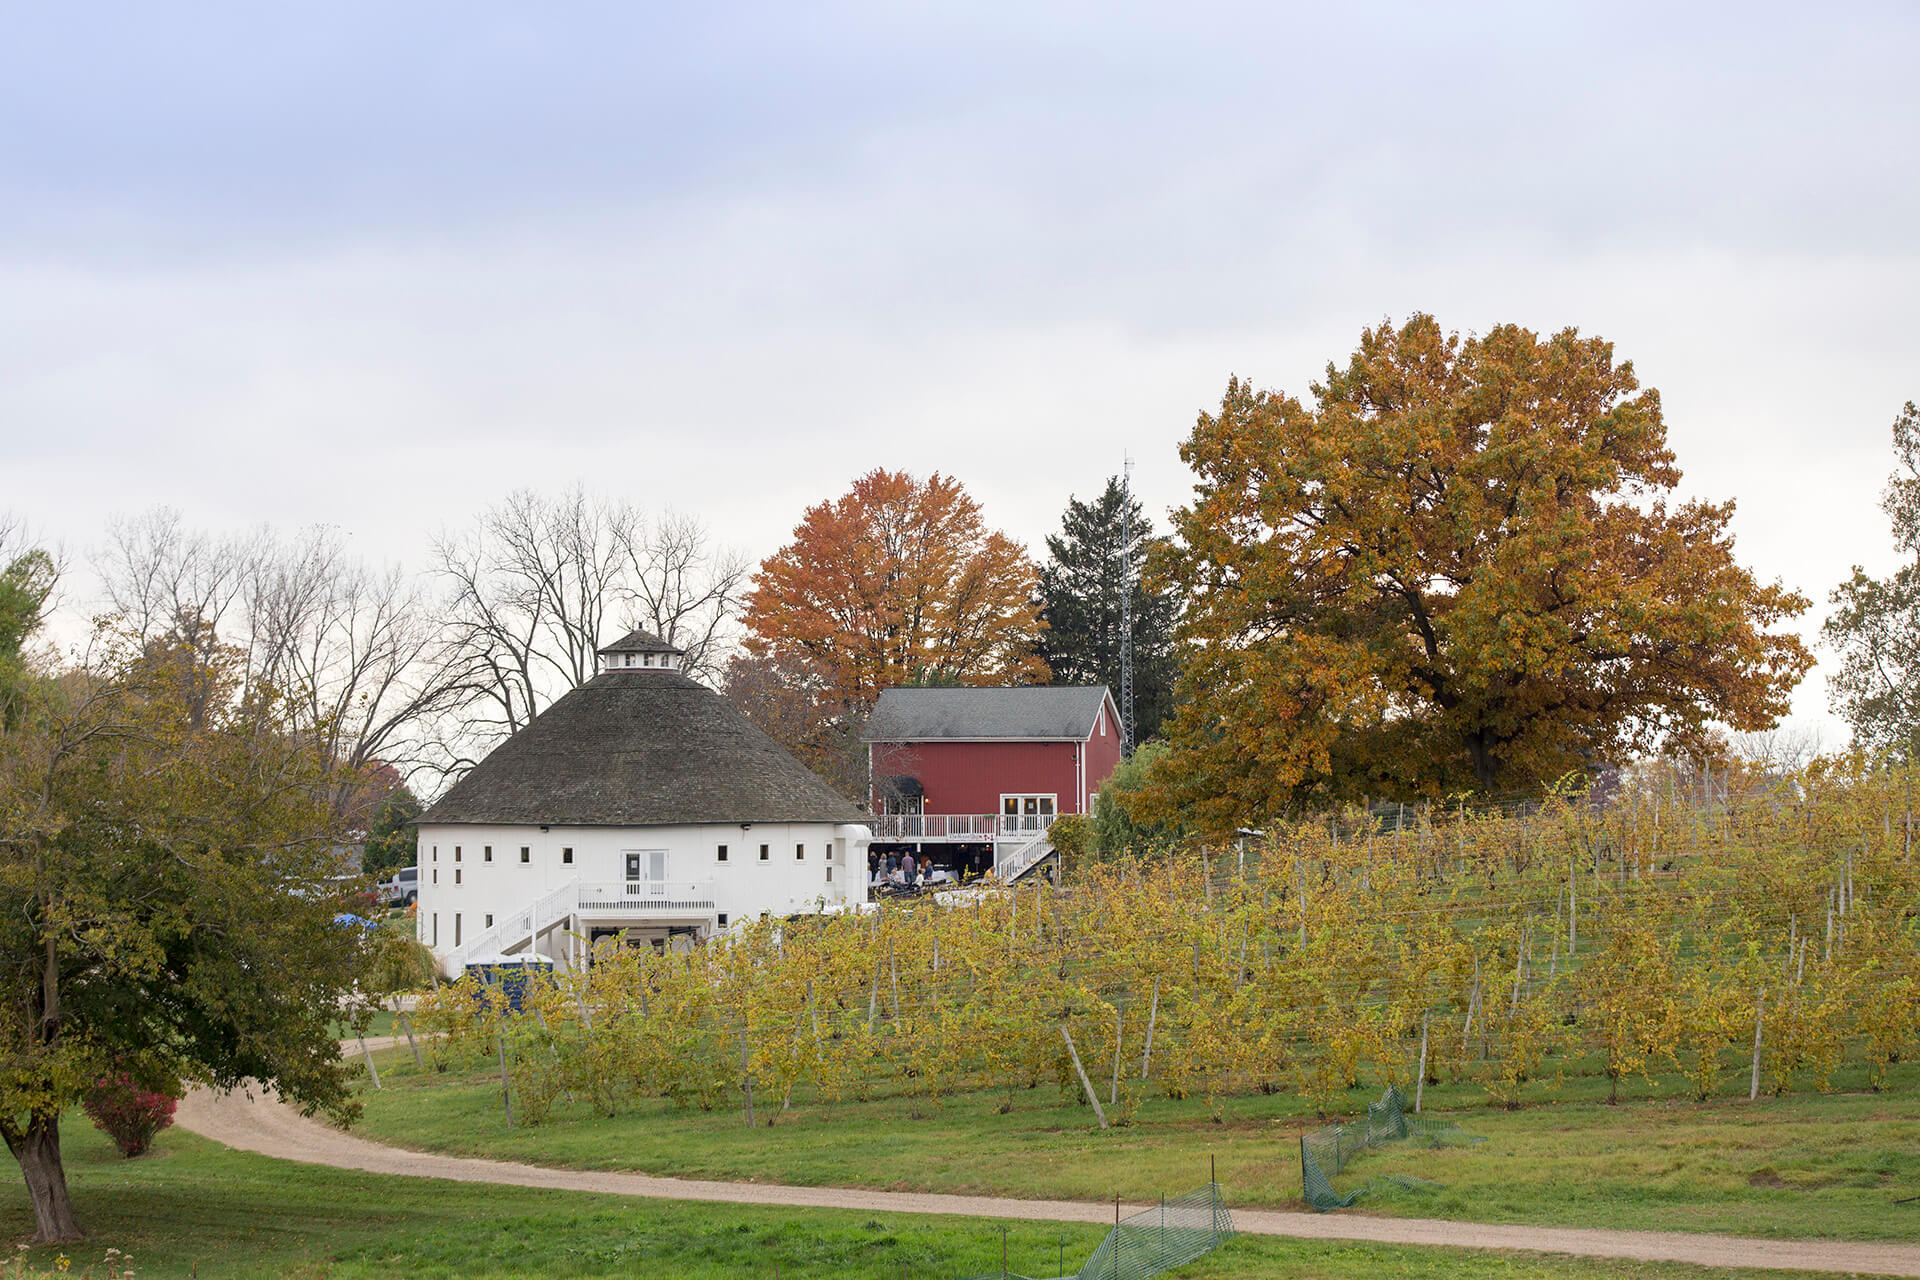 The Round Barn estate during fall